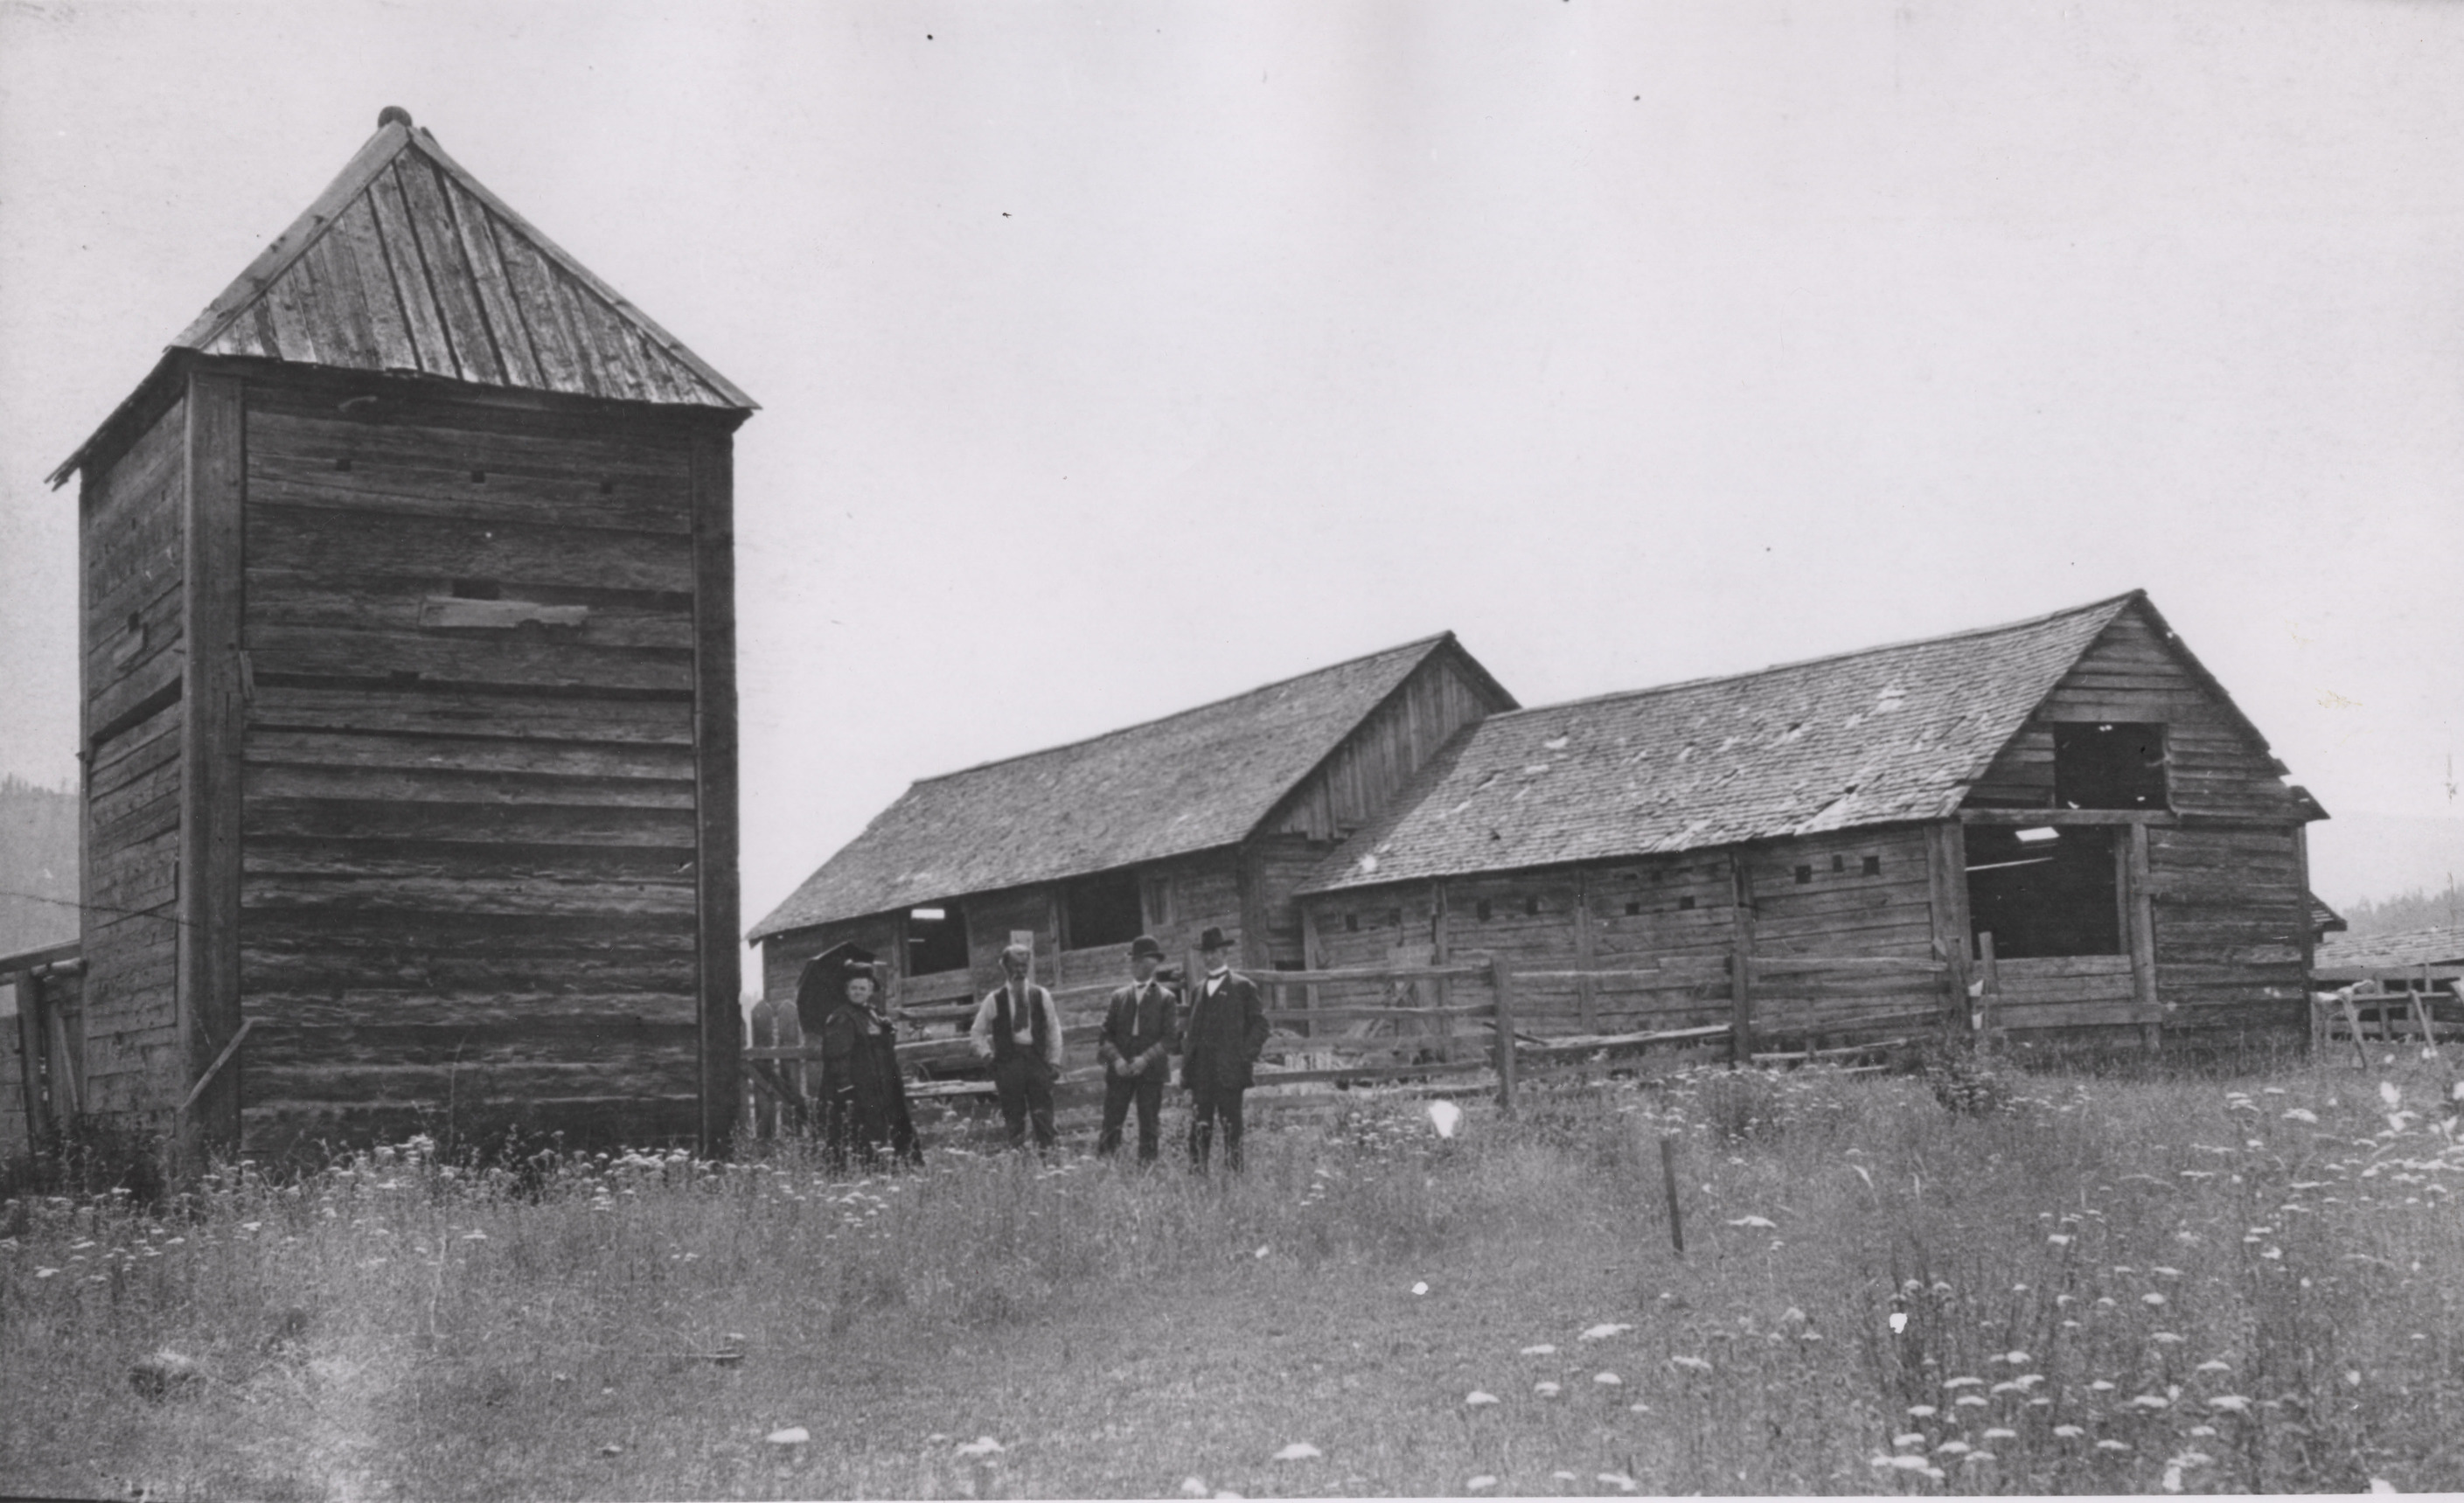 Black and white photograph of three men and a woman standing in front of several dilapidated wooden buildings